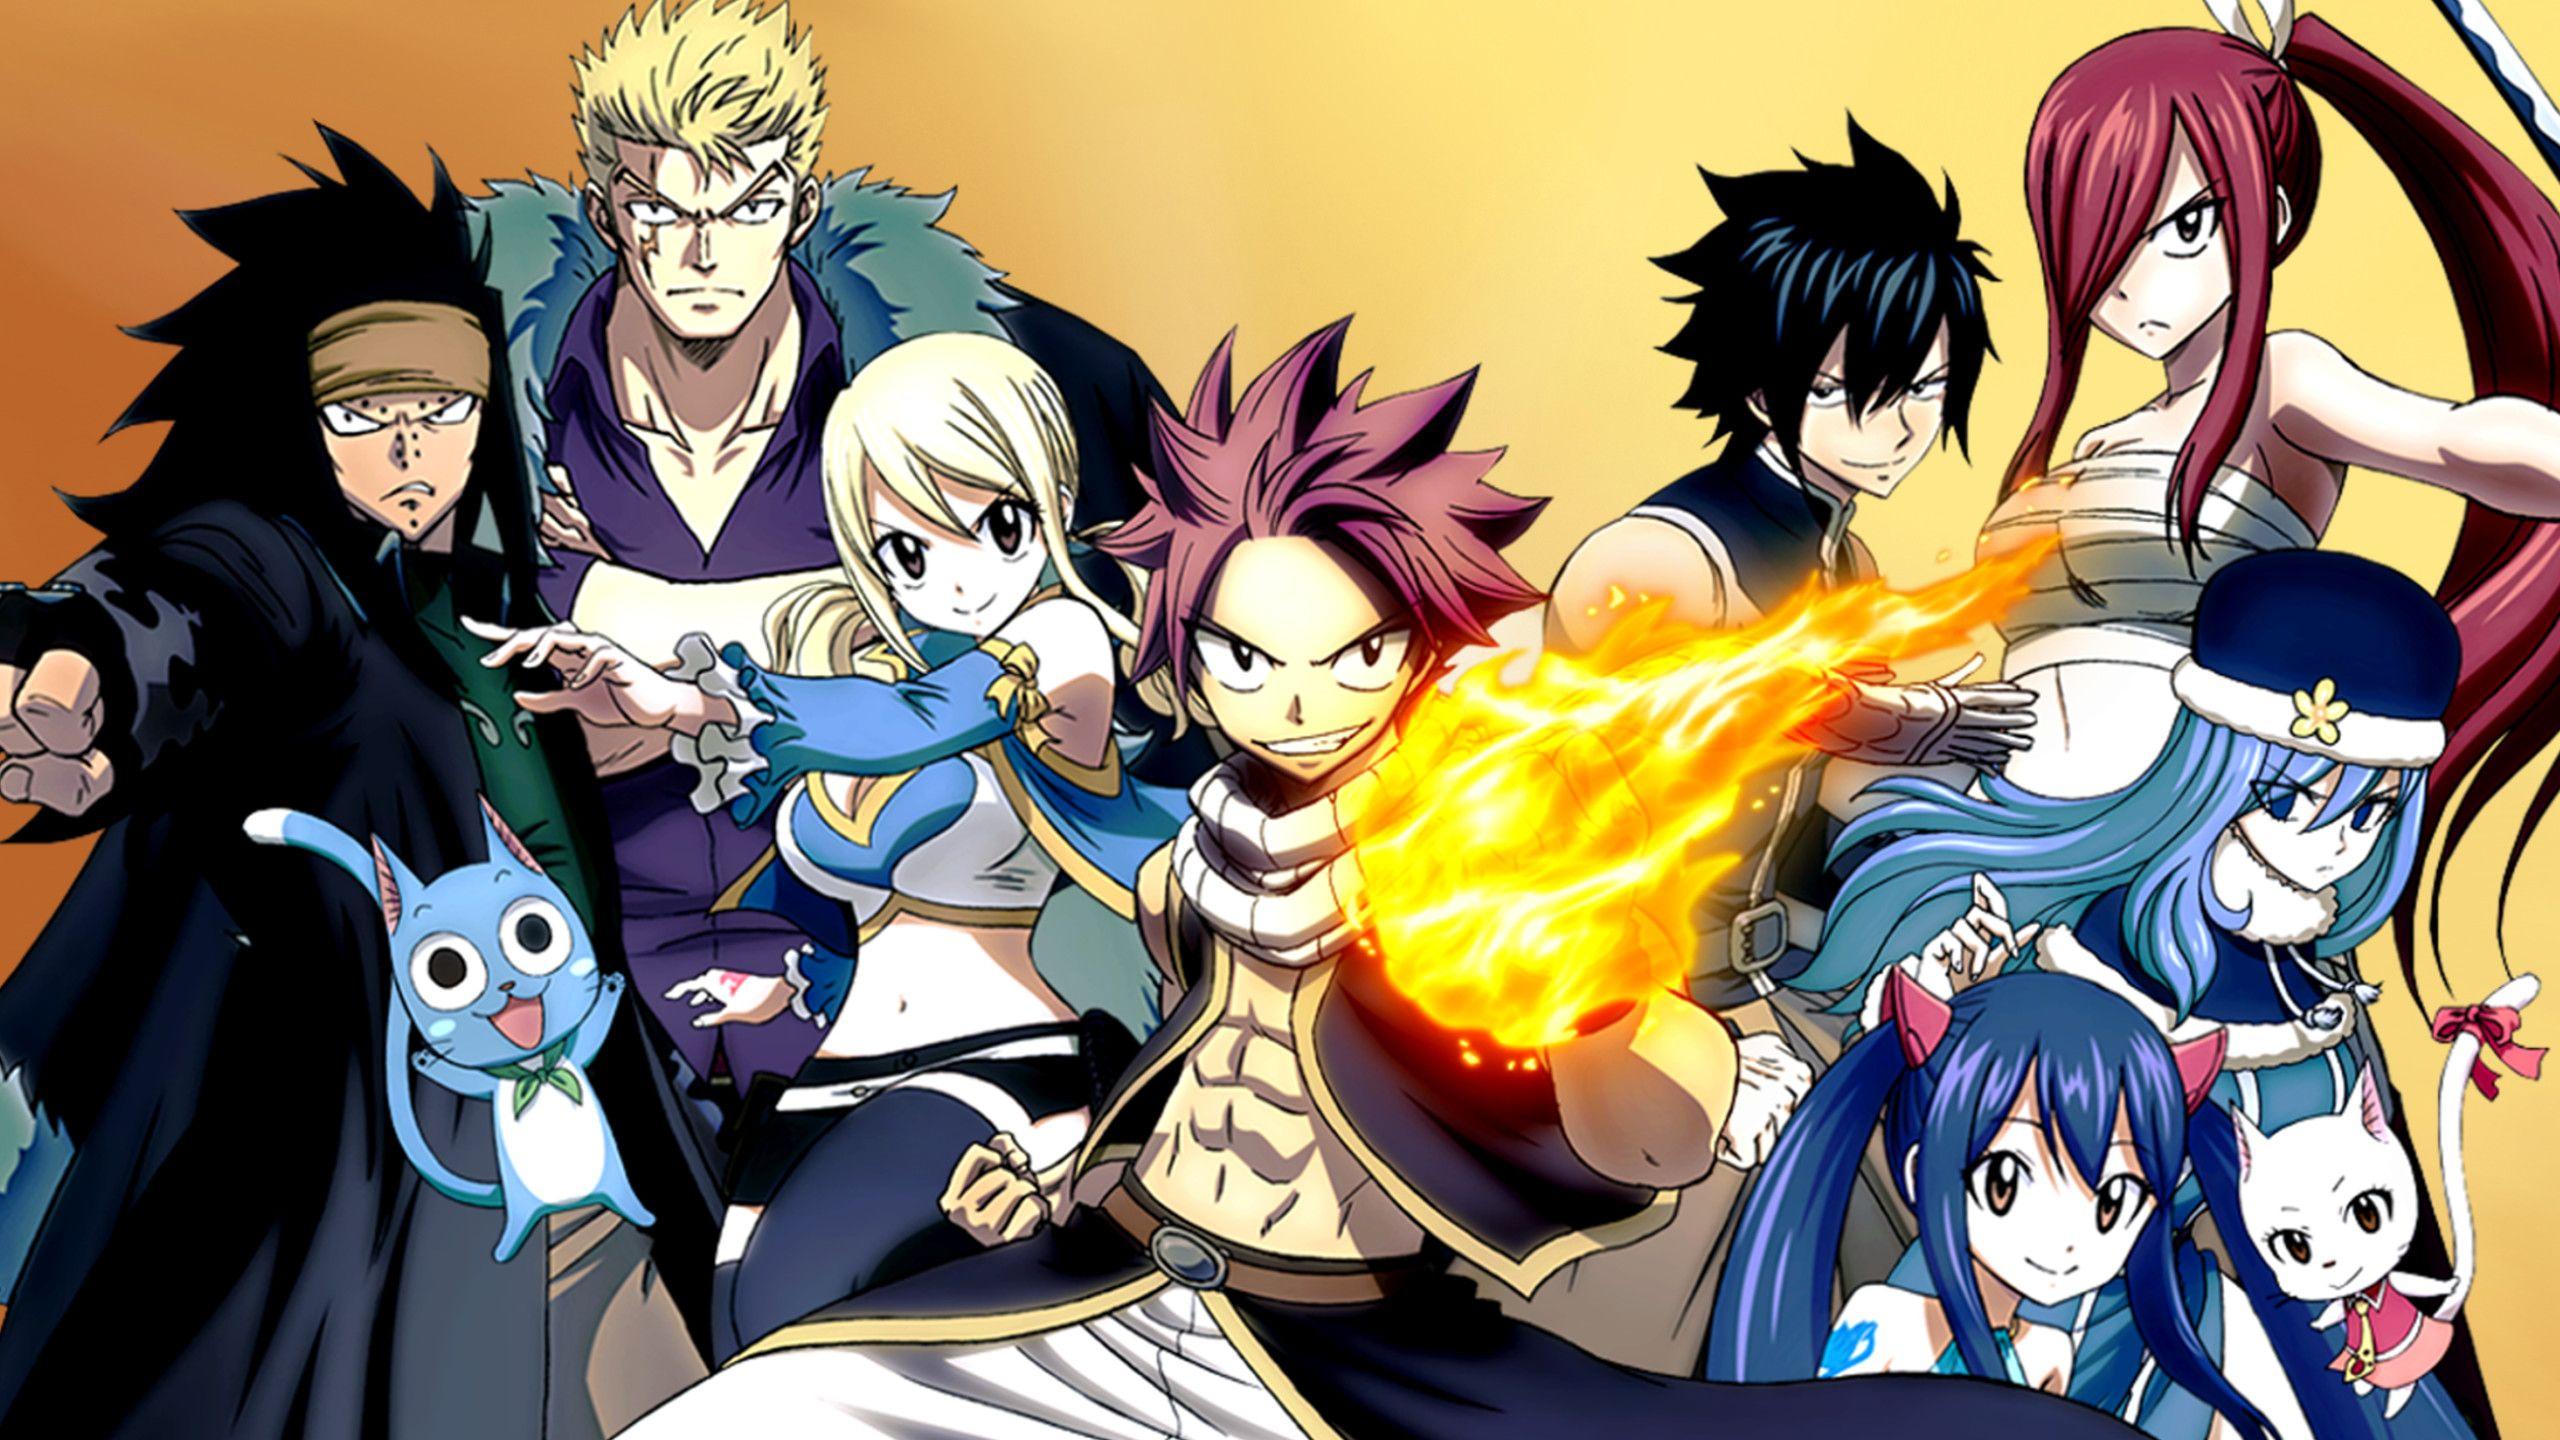 Fairy Tail Anime Wallpapers Top Free Fairy Tail Anime Backgrounds Wallpaperaccess